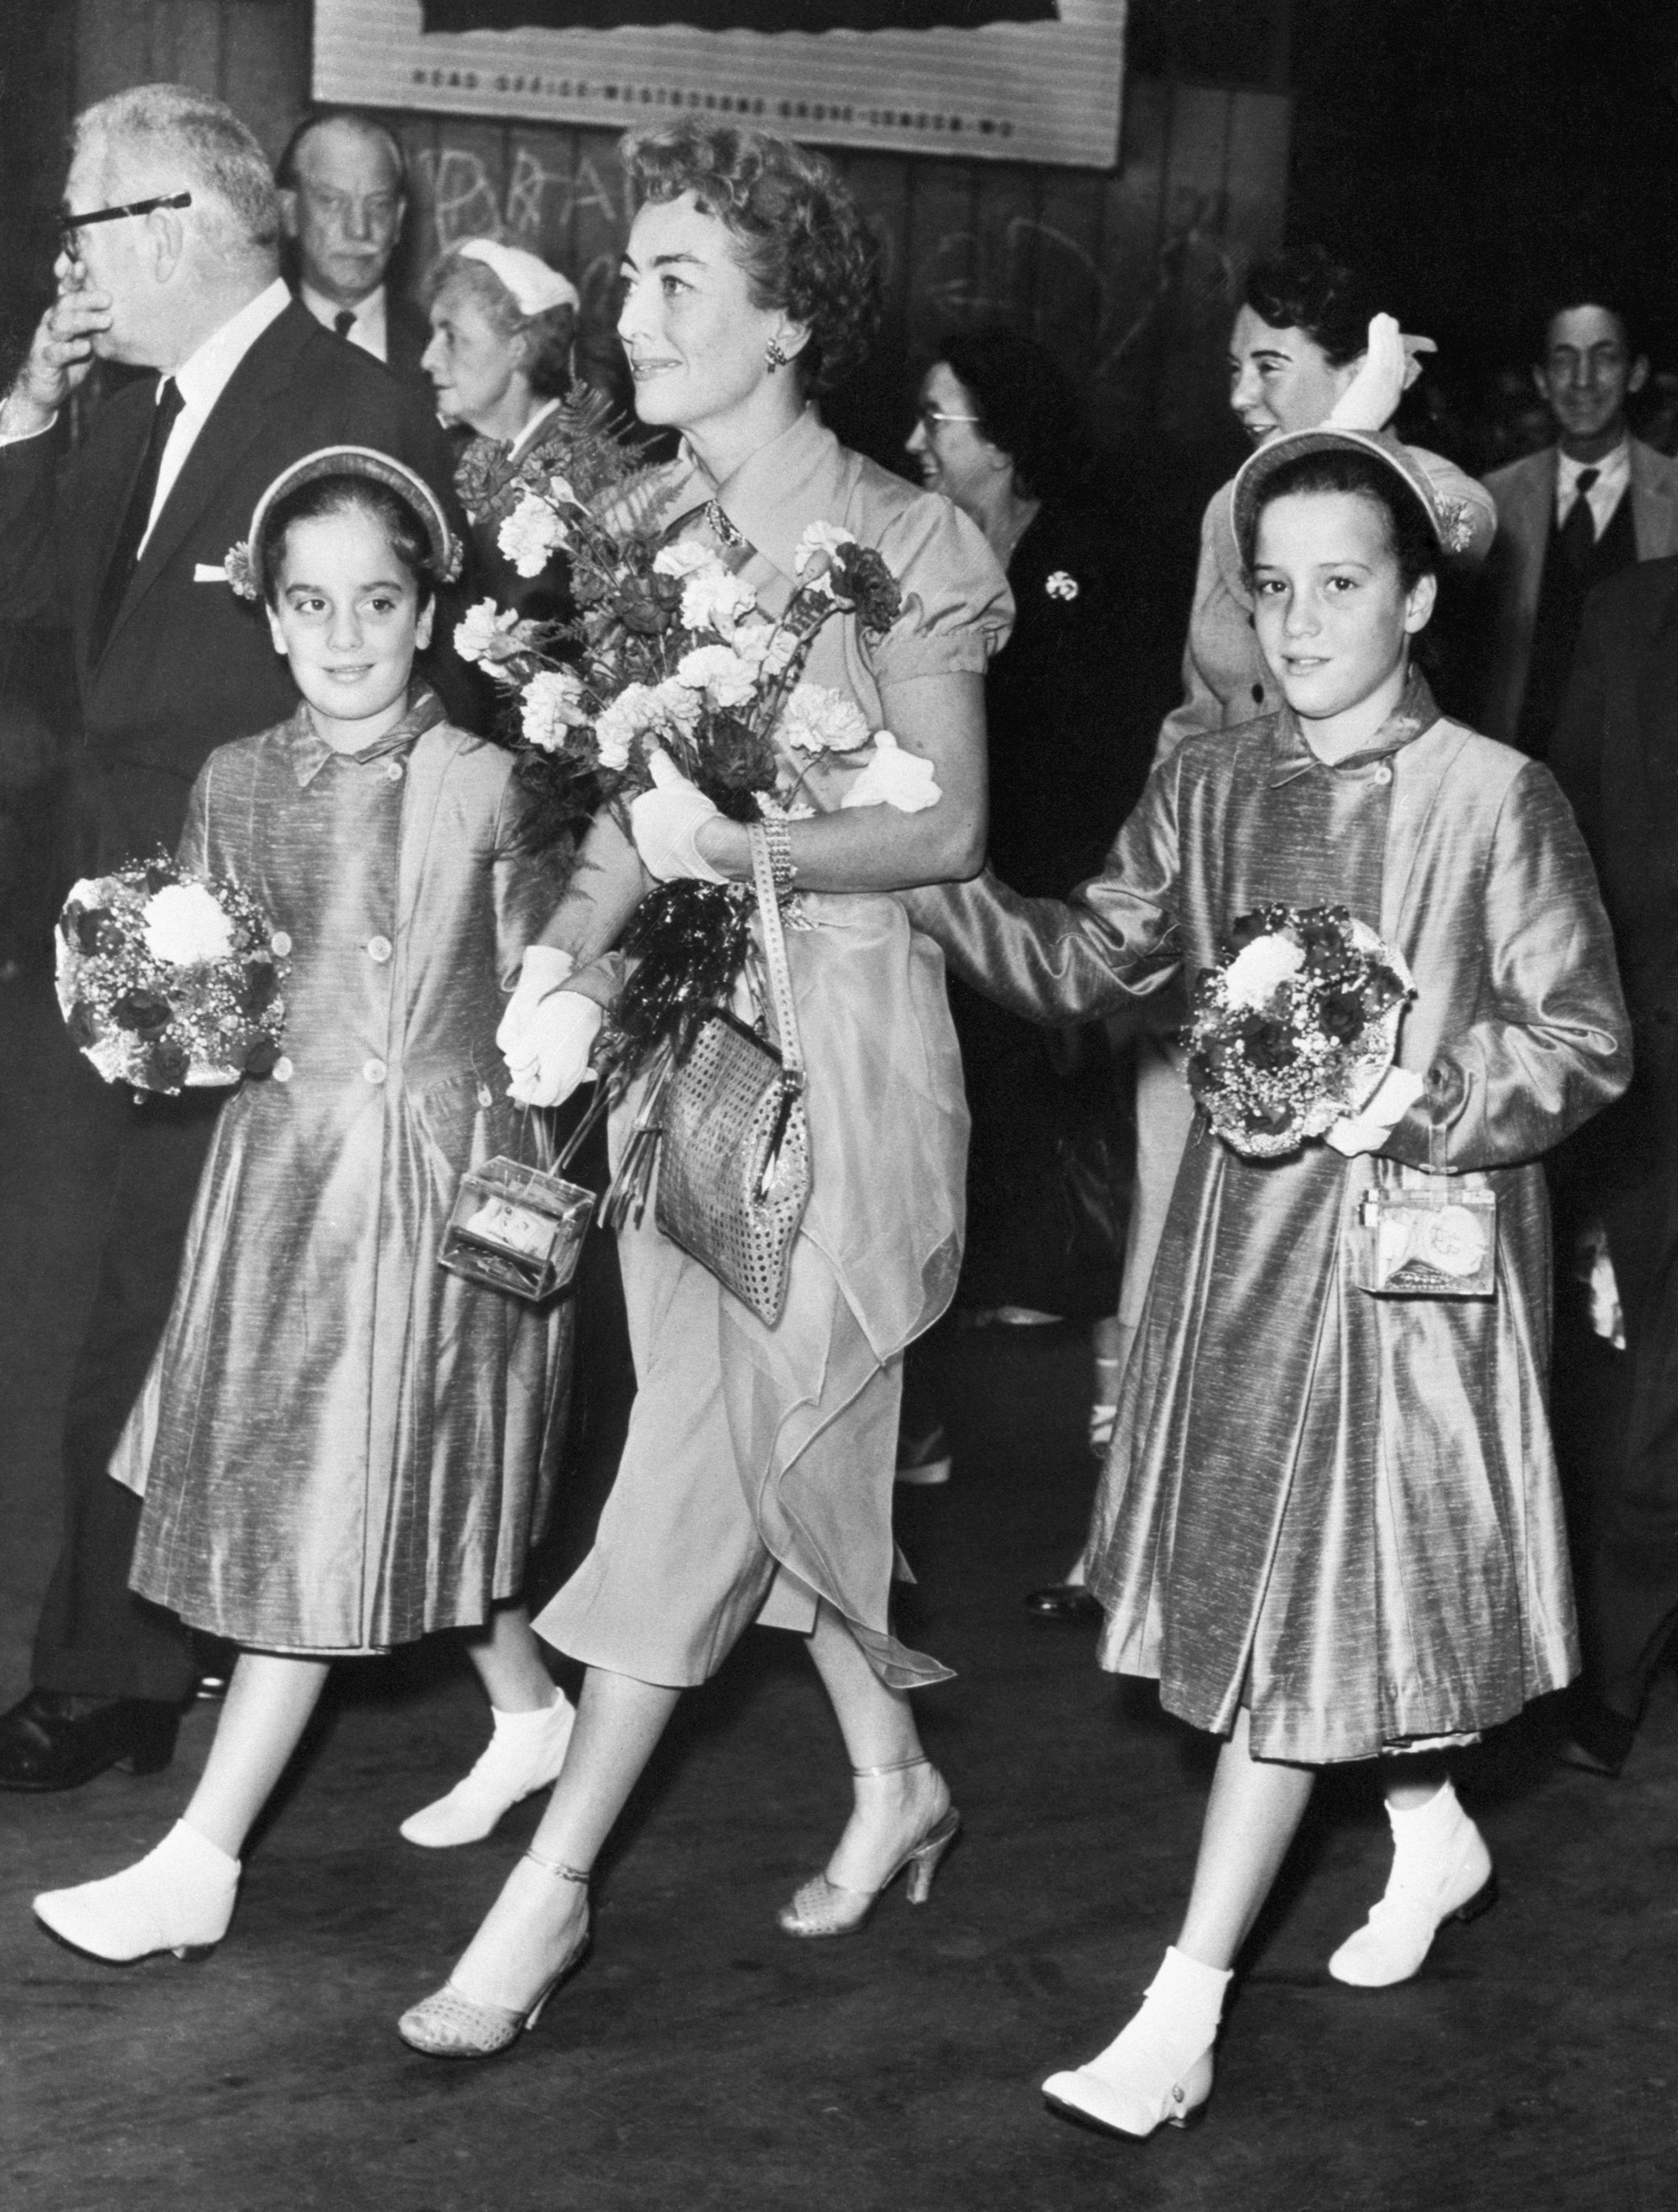 Hollywood actress Joan Crawford strides along the platform of London's Paddington Station with her adopted twin daughters, Cynthia (right) and Cathy, 8/3/56-London, England: | Photo: Getty Images